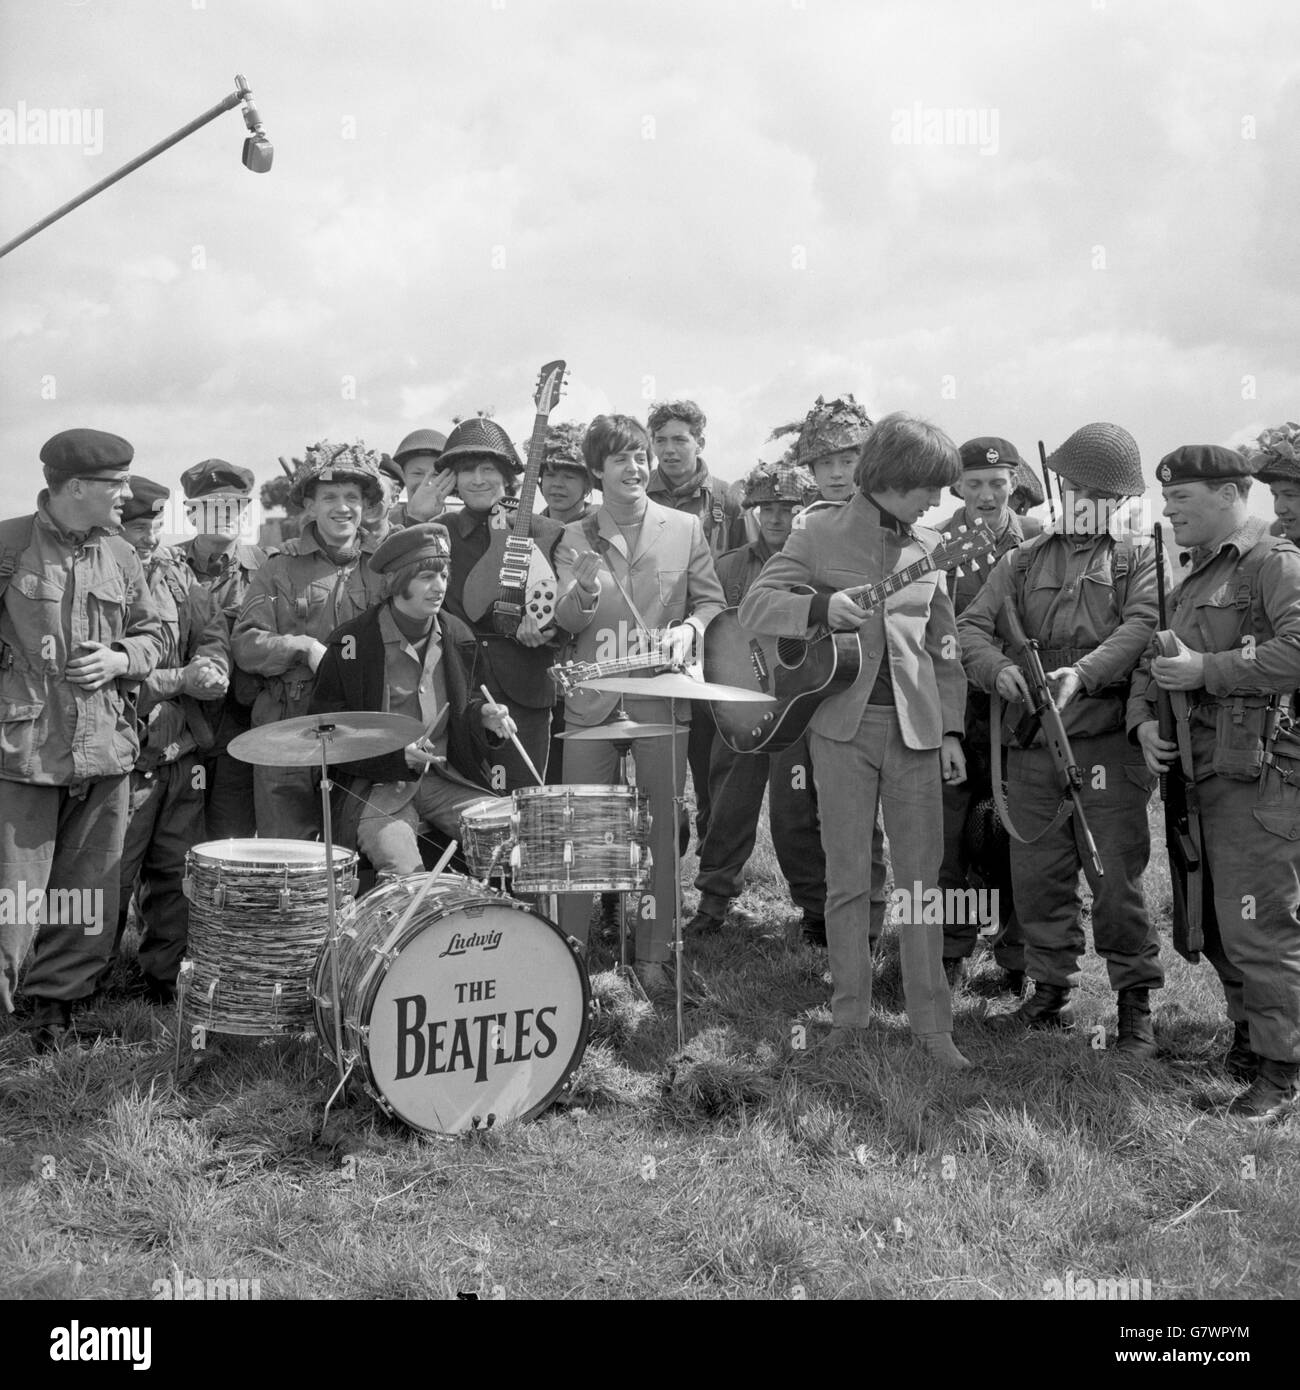 The Beatles play with an Army audience when on location shooting for their new film at Larkhill. Left to right - Ringo Starr (on drums), John Lennon, Paul McCartney and George Harrison. Stock Photo